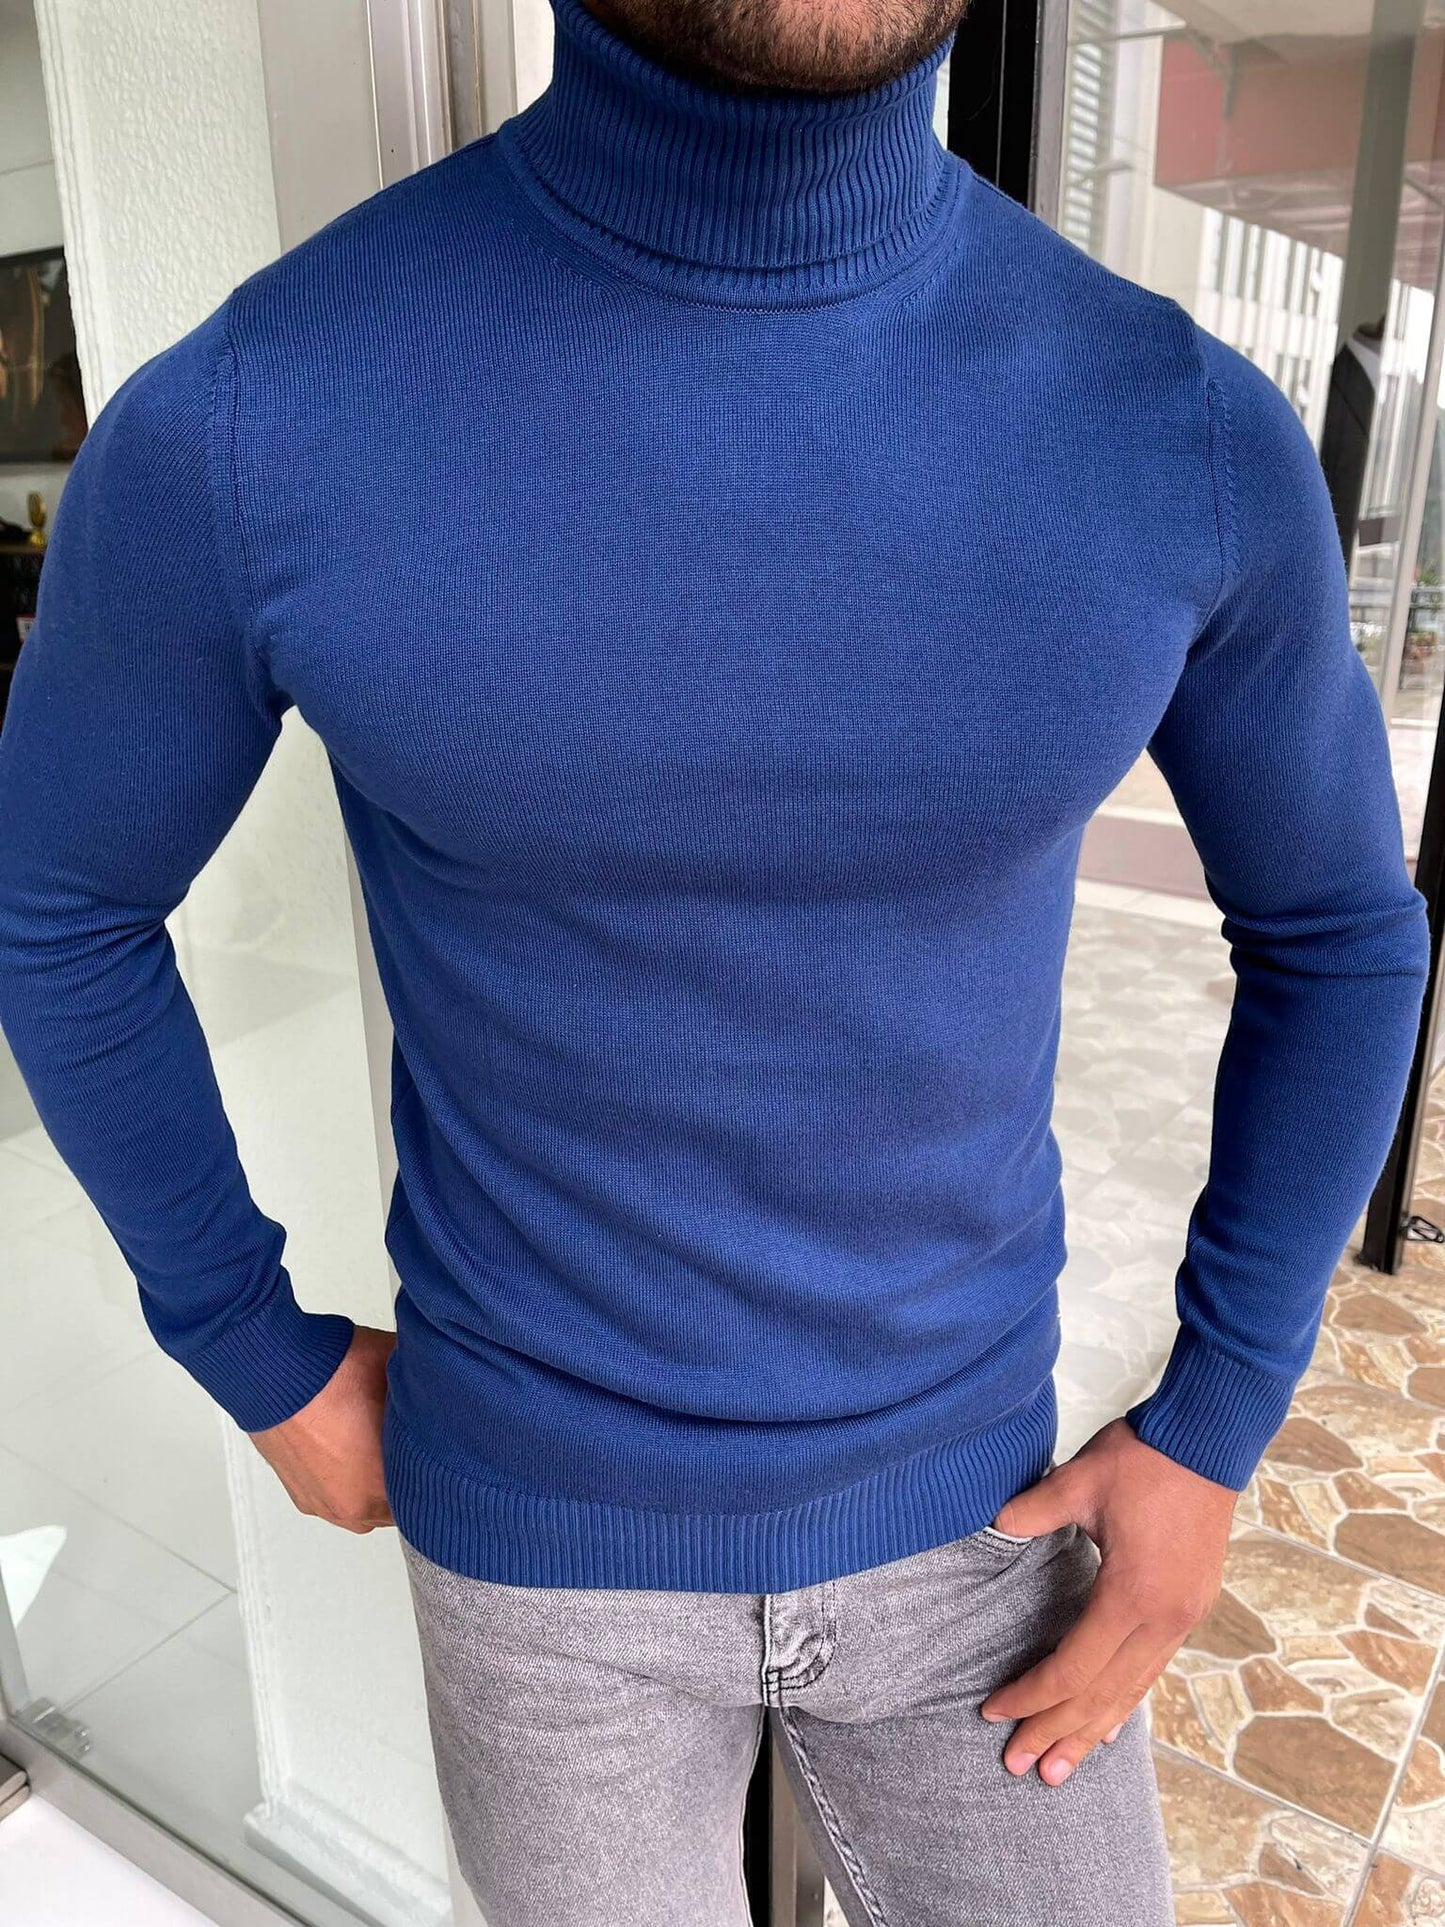 An elegant, sax turtleneck sweater made of high-quality fabric worn by a model